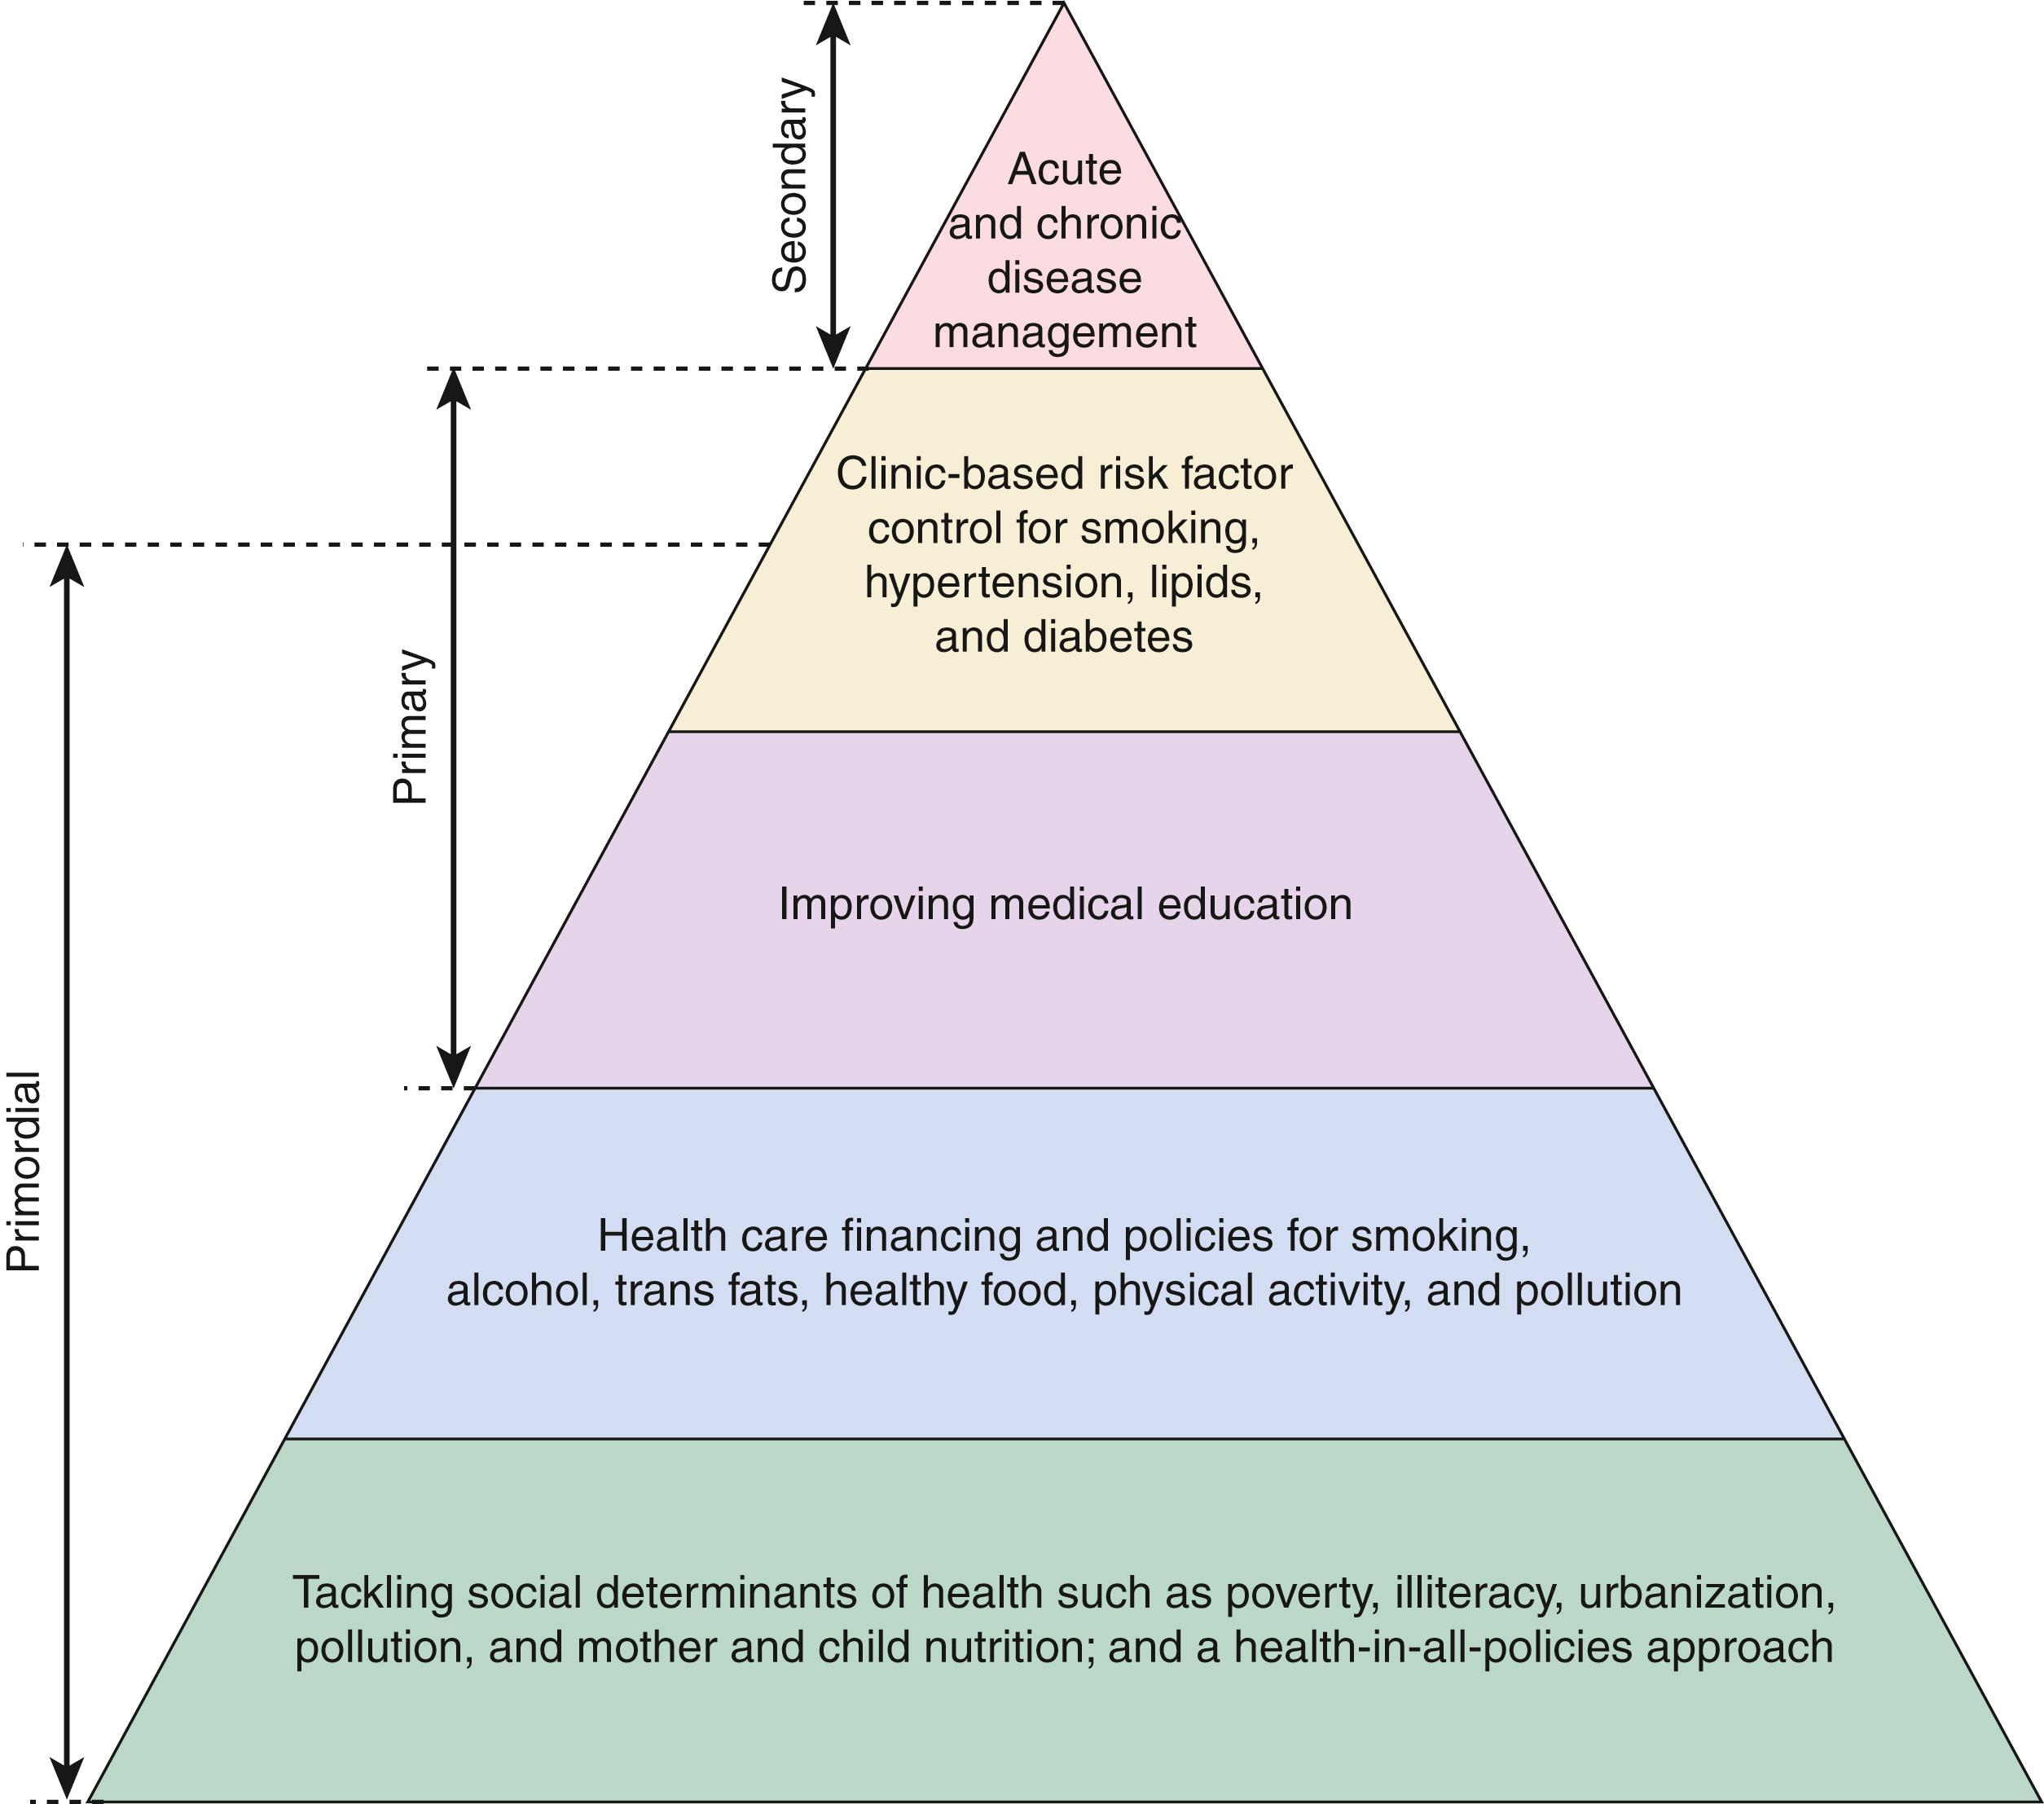 FIGURE 25.1, Types of prevention. Primordial prevention is the prevention of the development of risk factors. Primary prevention is the prevention of the first clinical manifestation of cardiovascular disease. Secondary prevention is the prevention of recurrent cardiovascular events in patients with established disease.